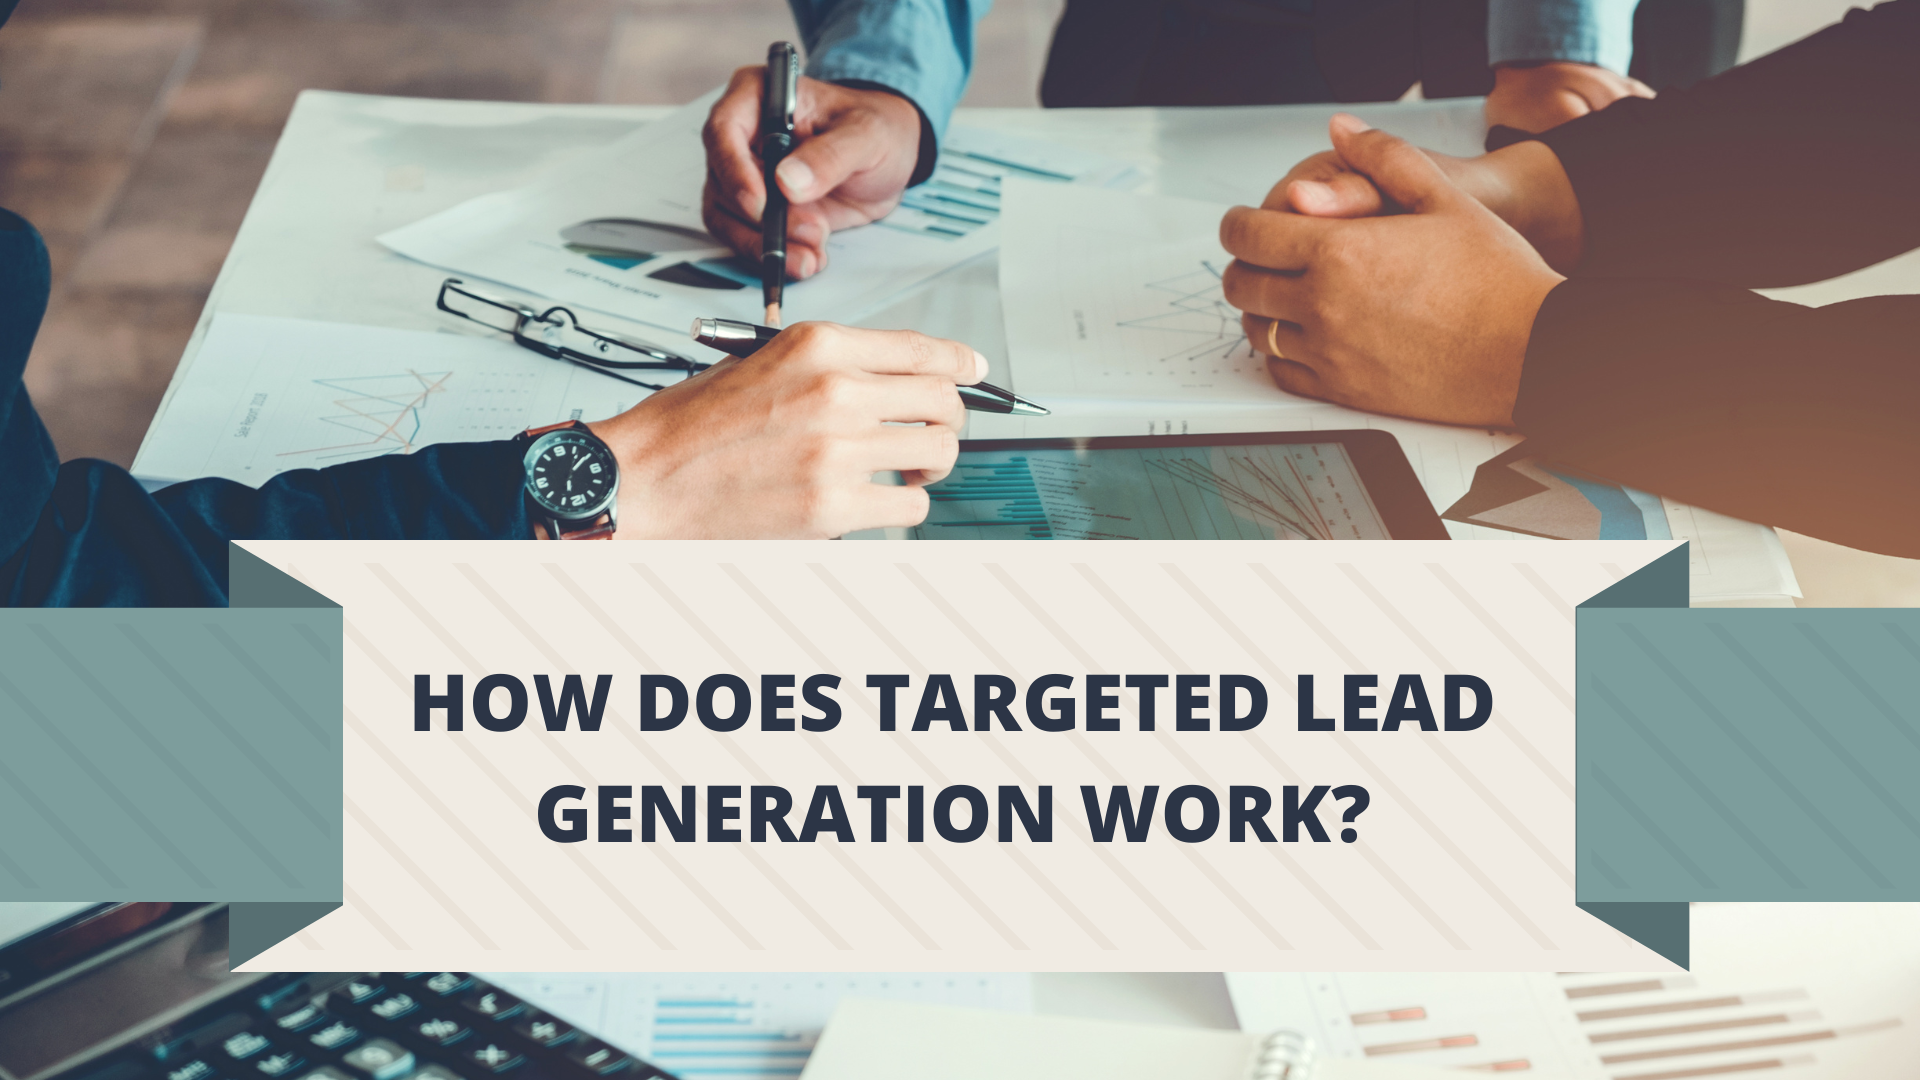 How Does Targeted Lead Generation Work?